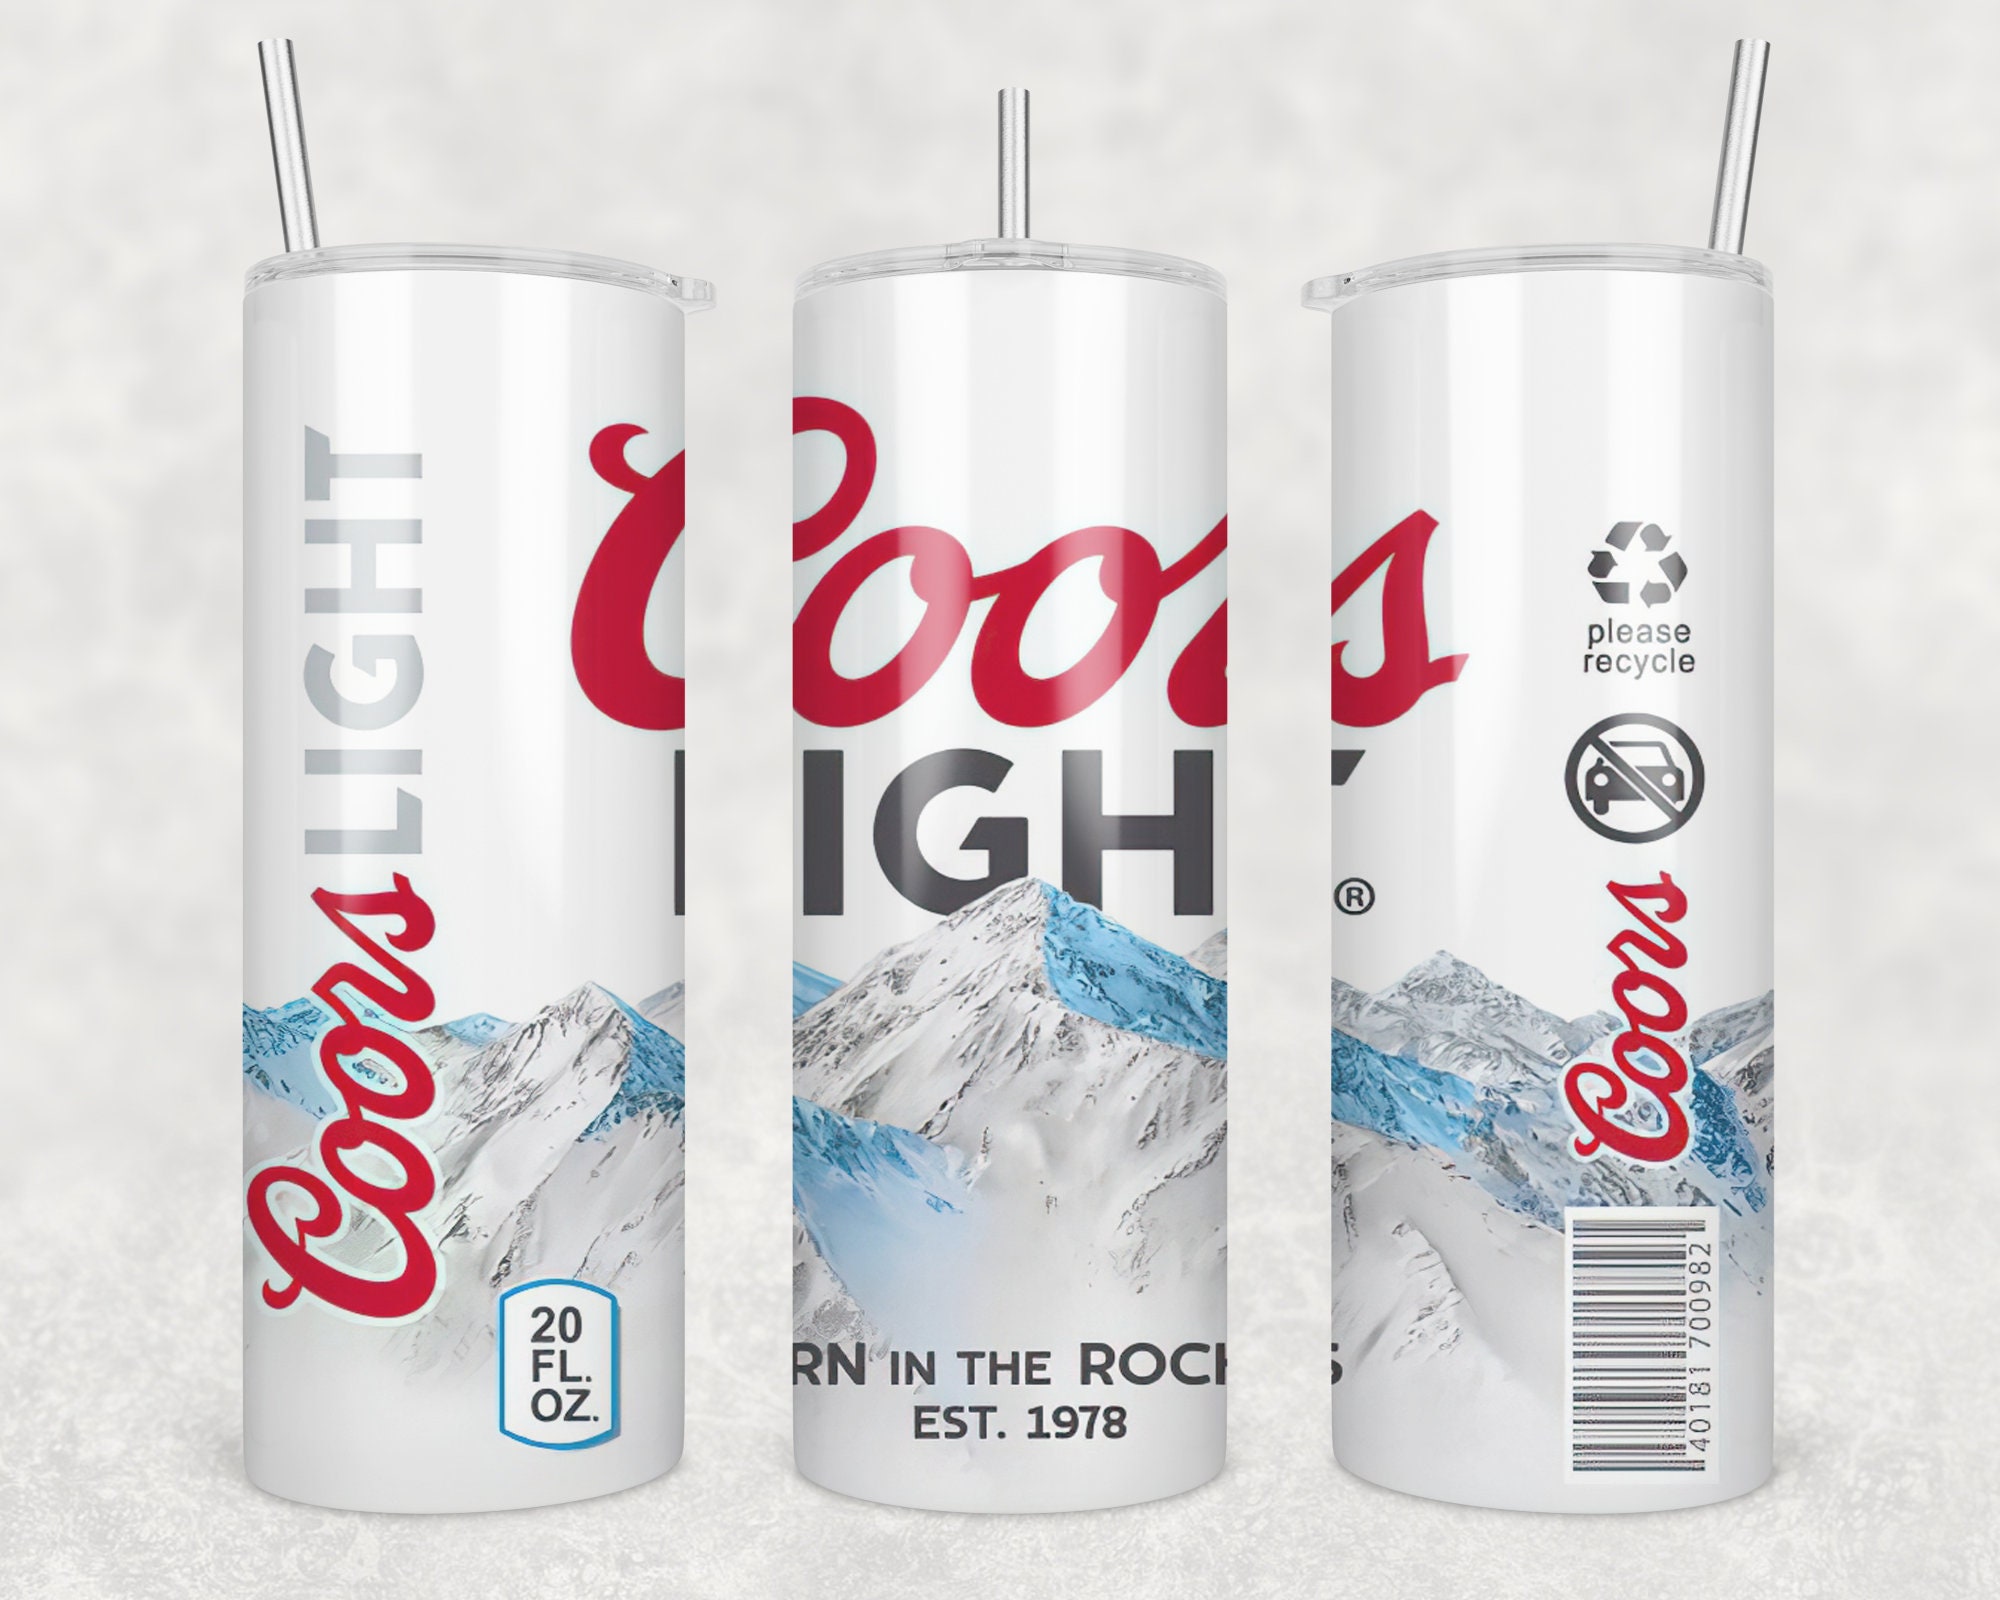 COORS LIGHT MOUNTAINS 3 BEER CAN COOLER COOZIE COOLIE KOOZIE HUGGIE PINK NEW